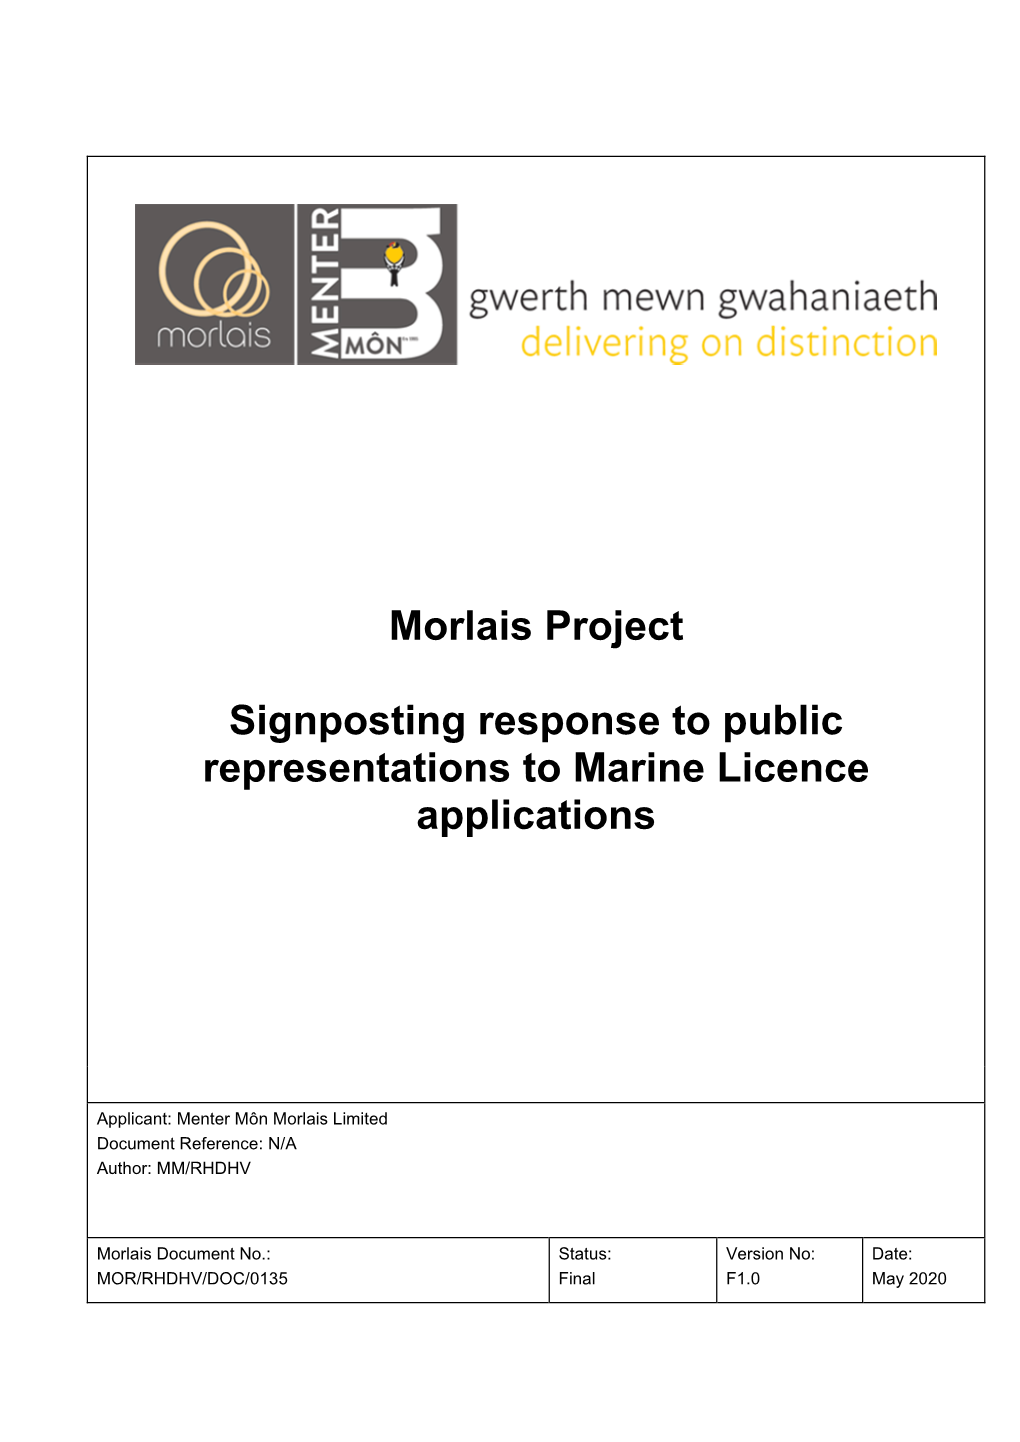 Morlais Project Signposting Response to Public Representations to Marine